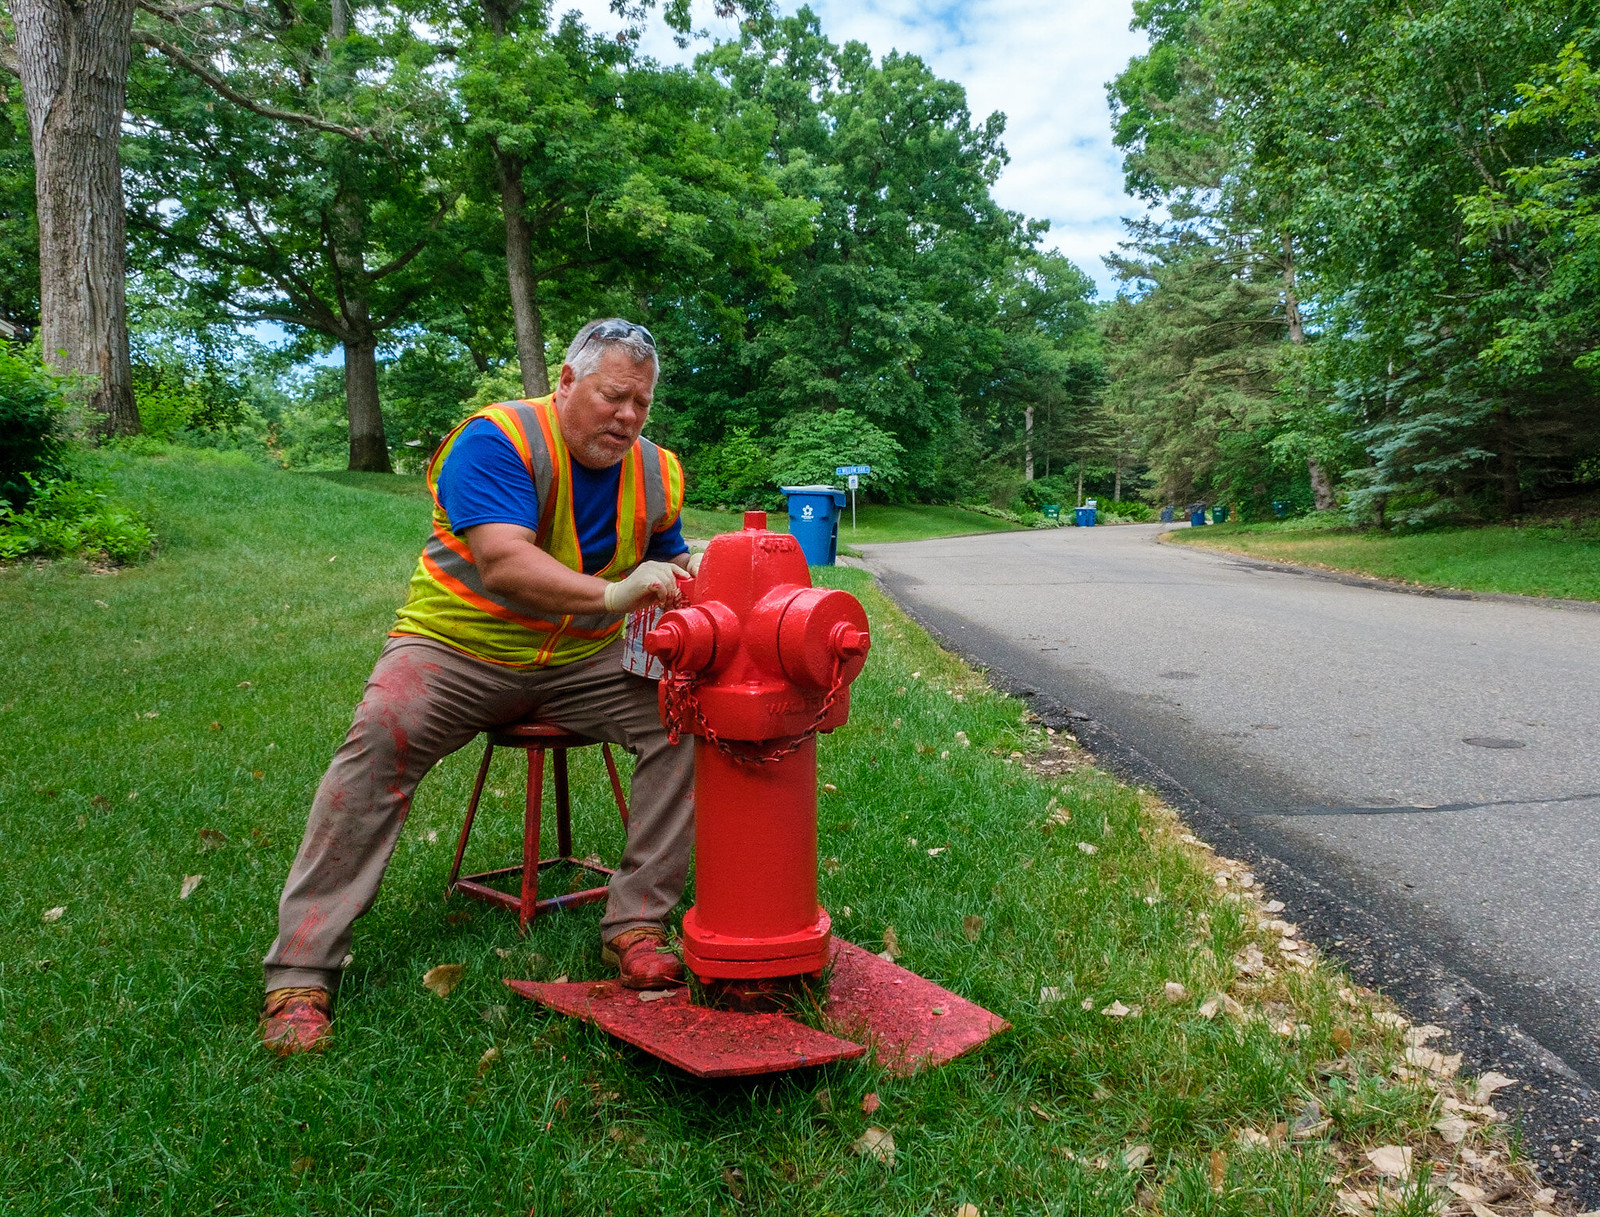 Someone's got to paint the fire hydrants